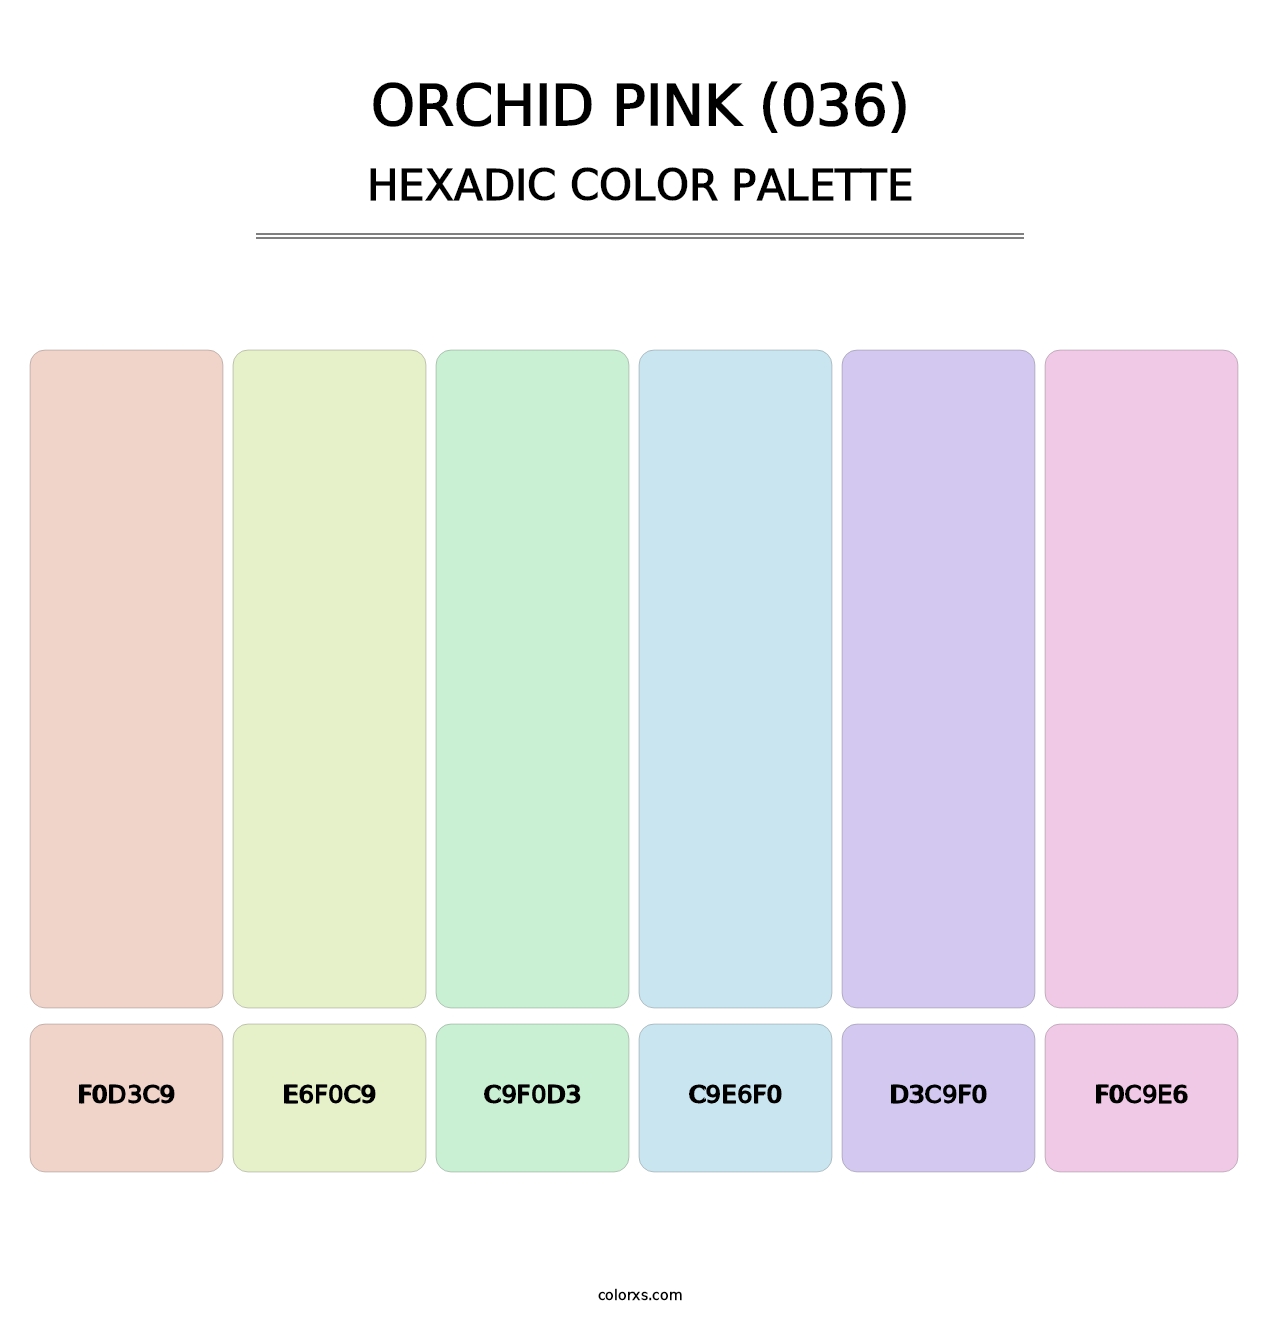 Orchid Pink (036) - Hexadic Color Palette